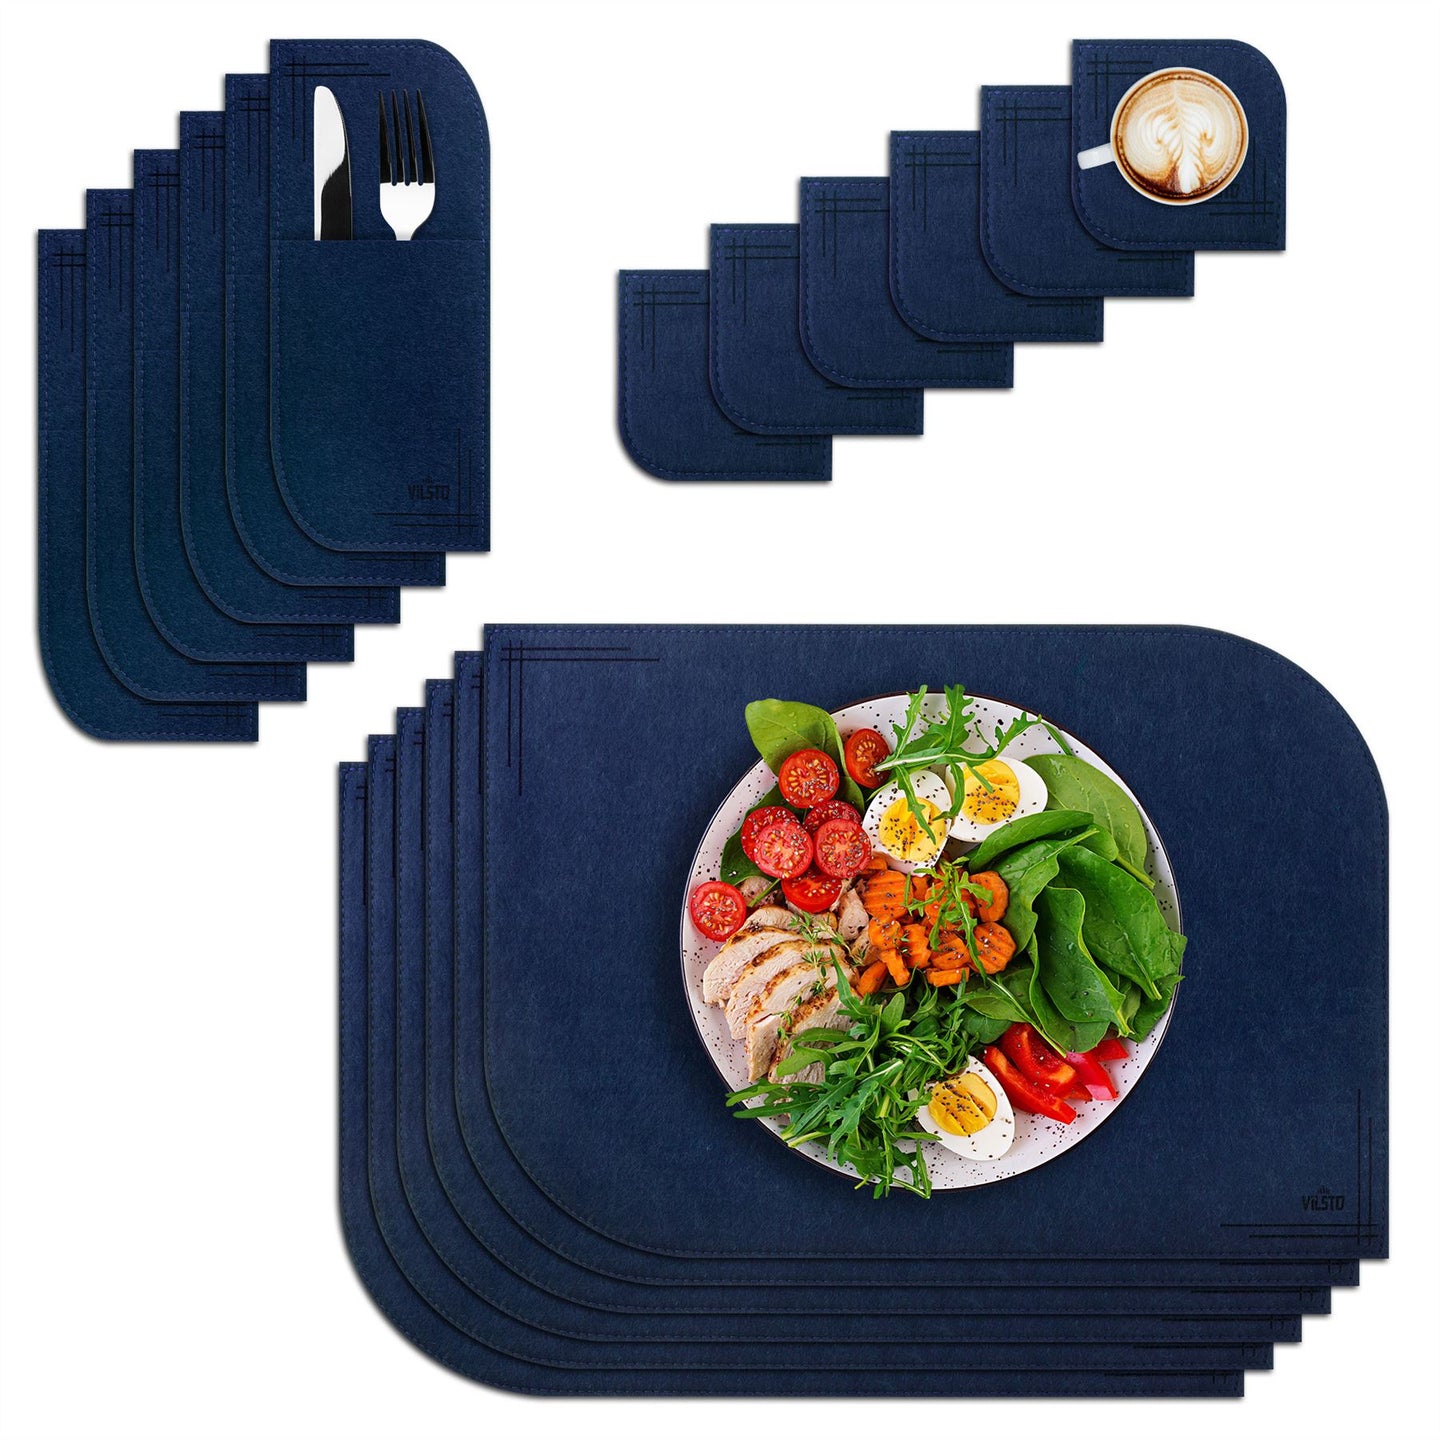 VILSTO Felt Fabric Place Mats, Dining Table Dinner Sets, Placemats and Coasters Set with Cutlery Holder, 18 Piece Set, Kitchen Mat, Dark Blue